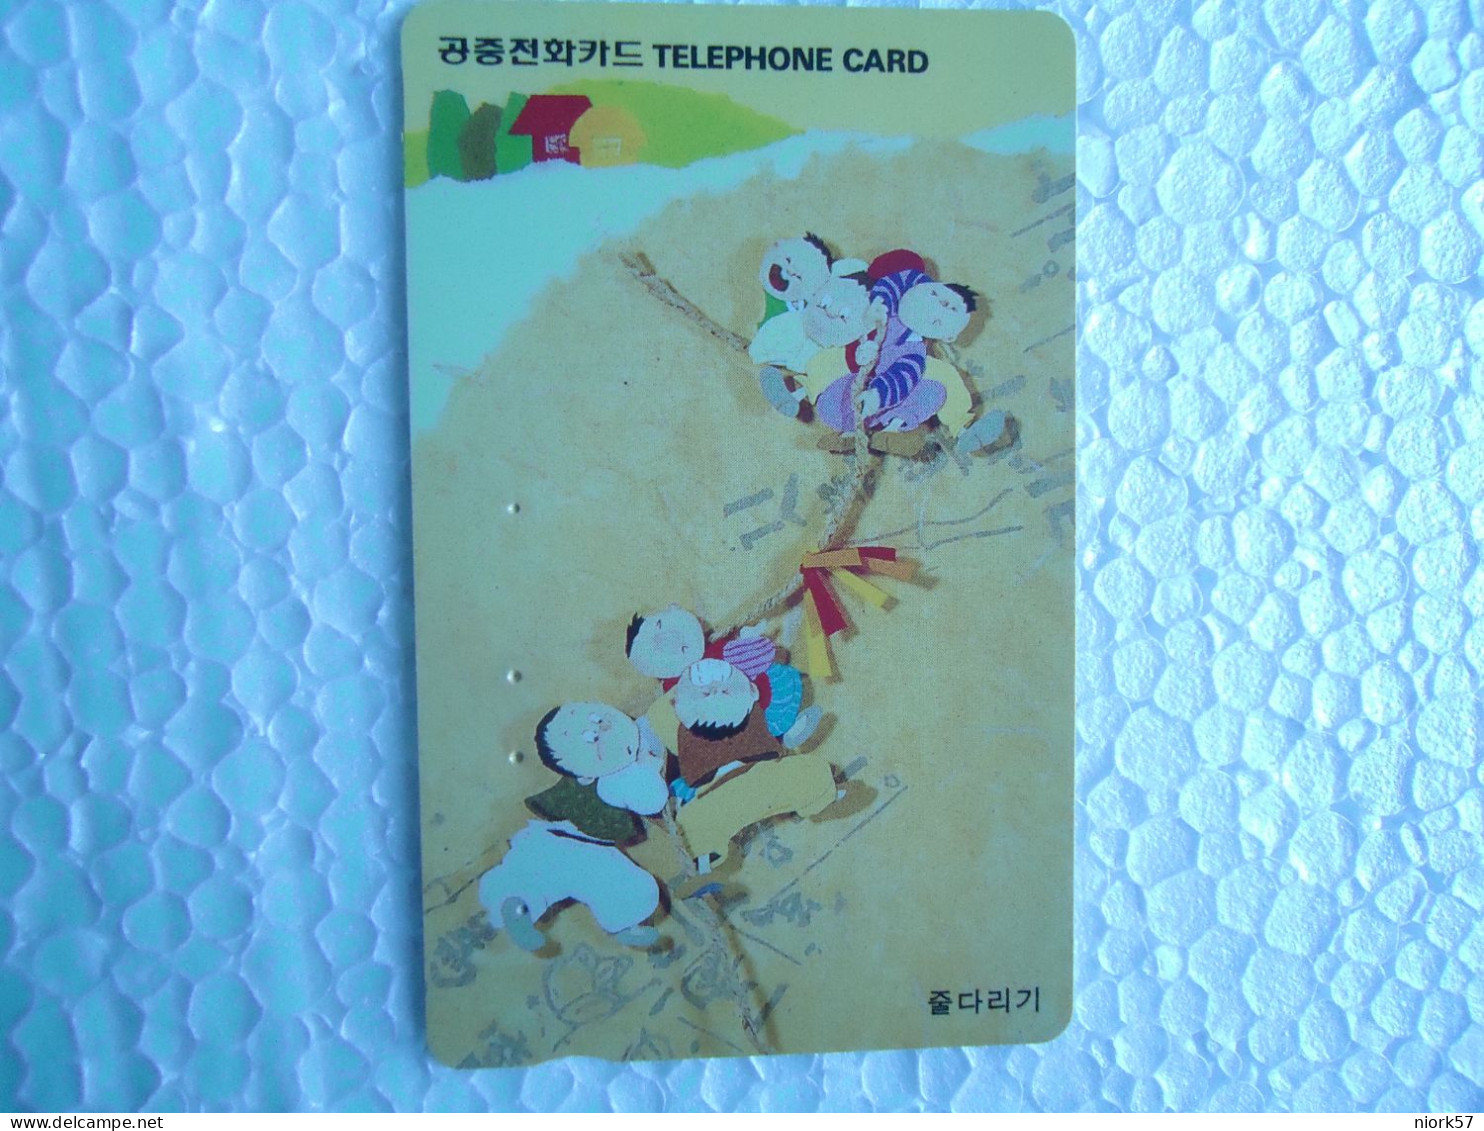 KOREA   USED CARDS  CULTURE  PAINTINGS - Painting